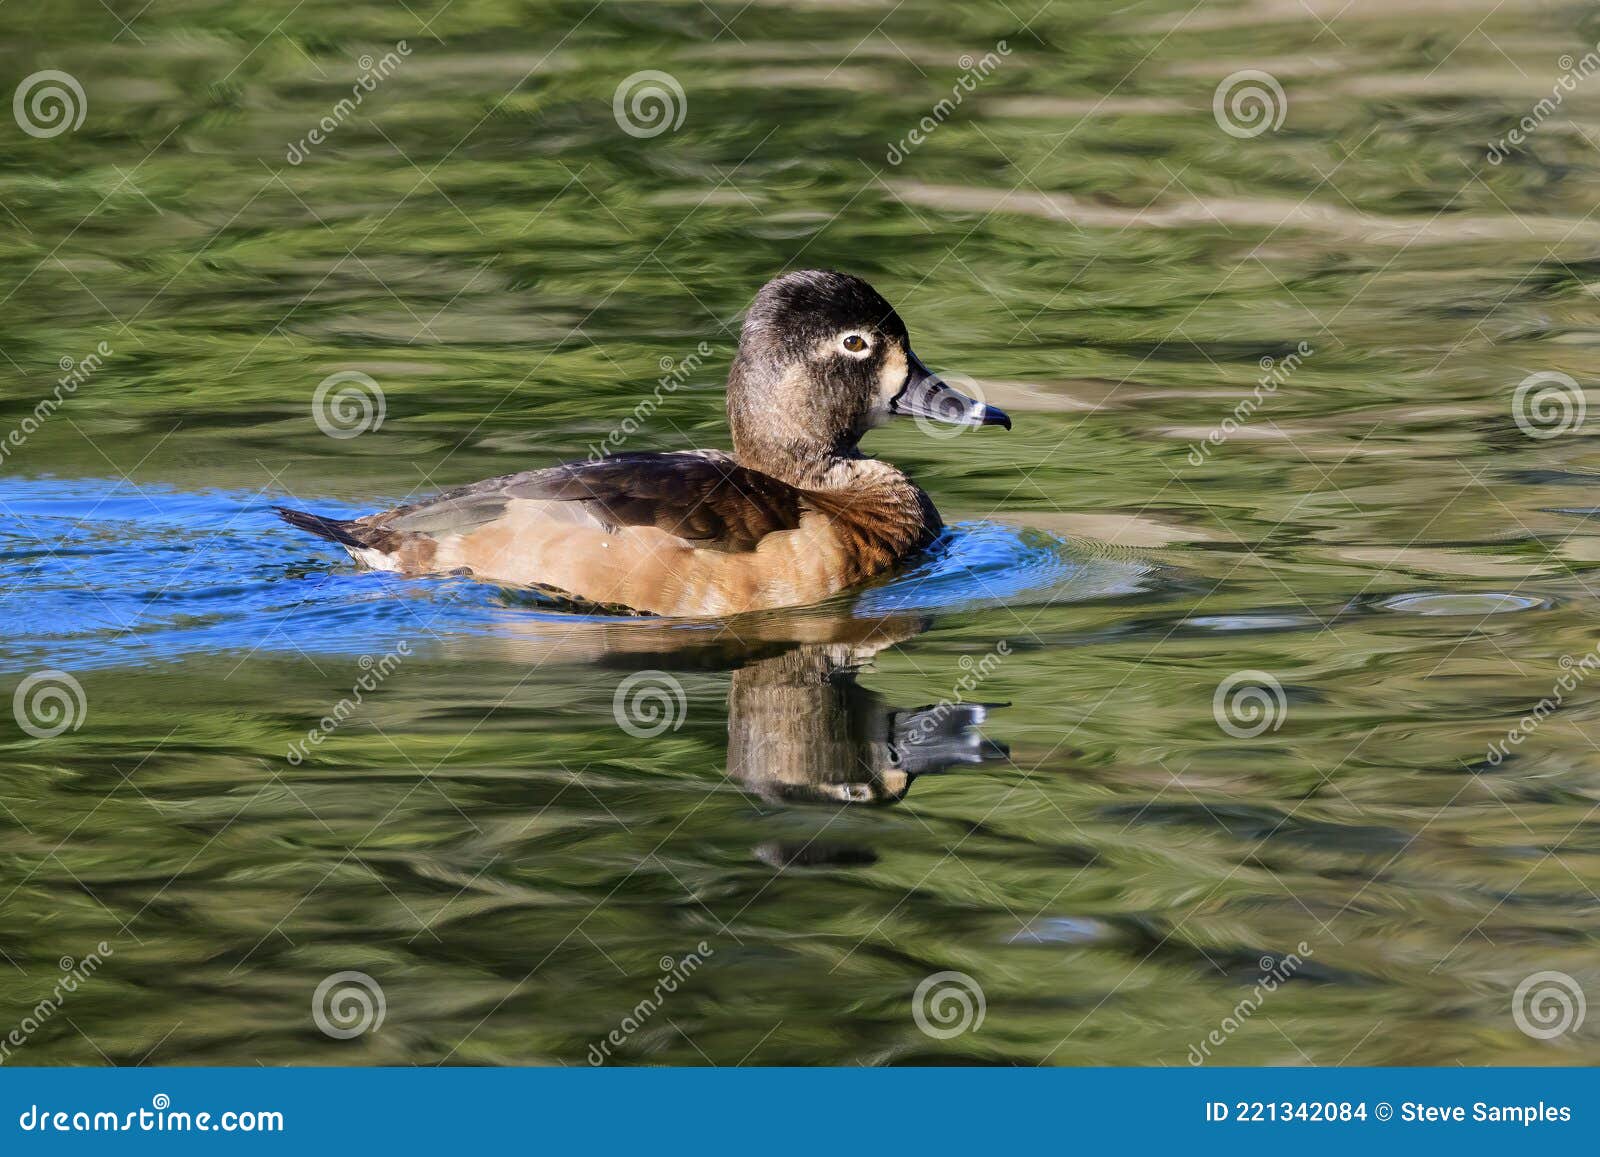 Ring-necked Ducks | Mike Powell